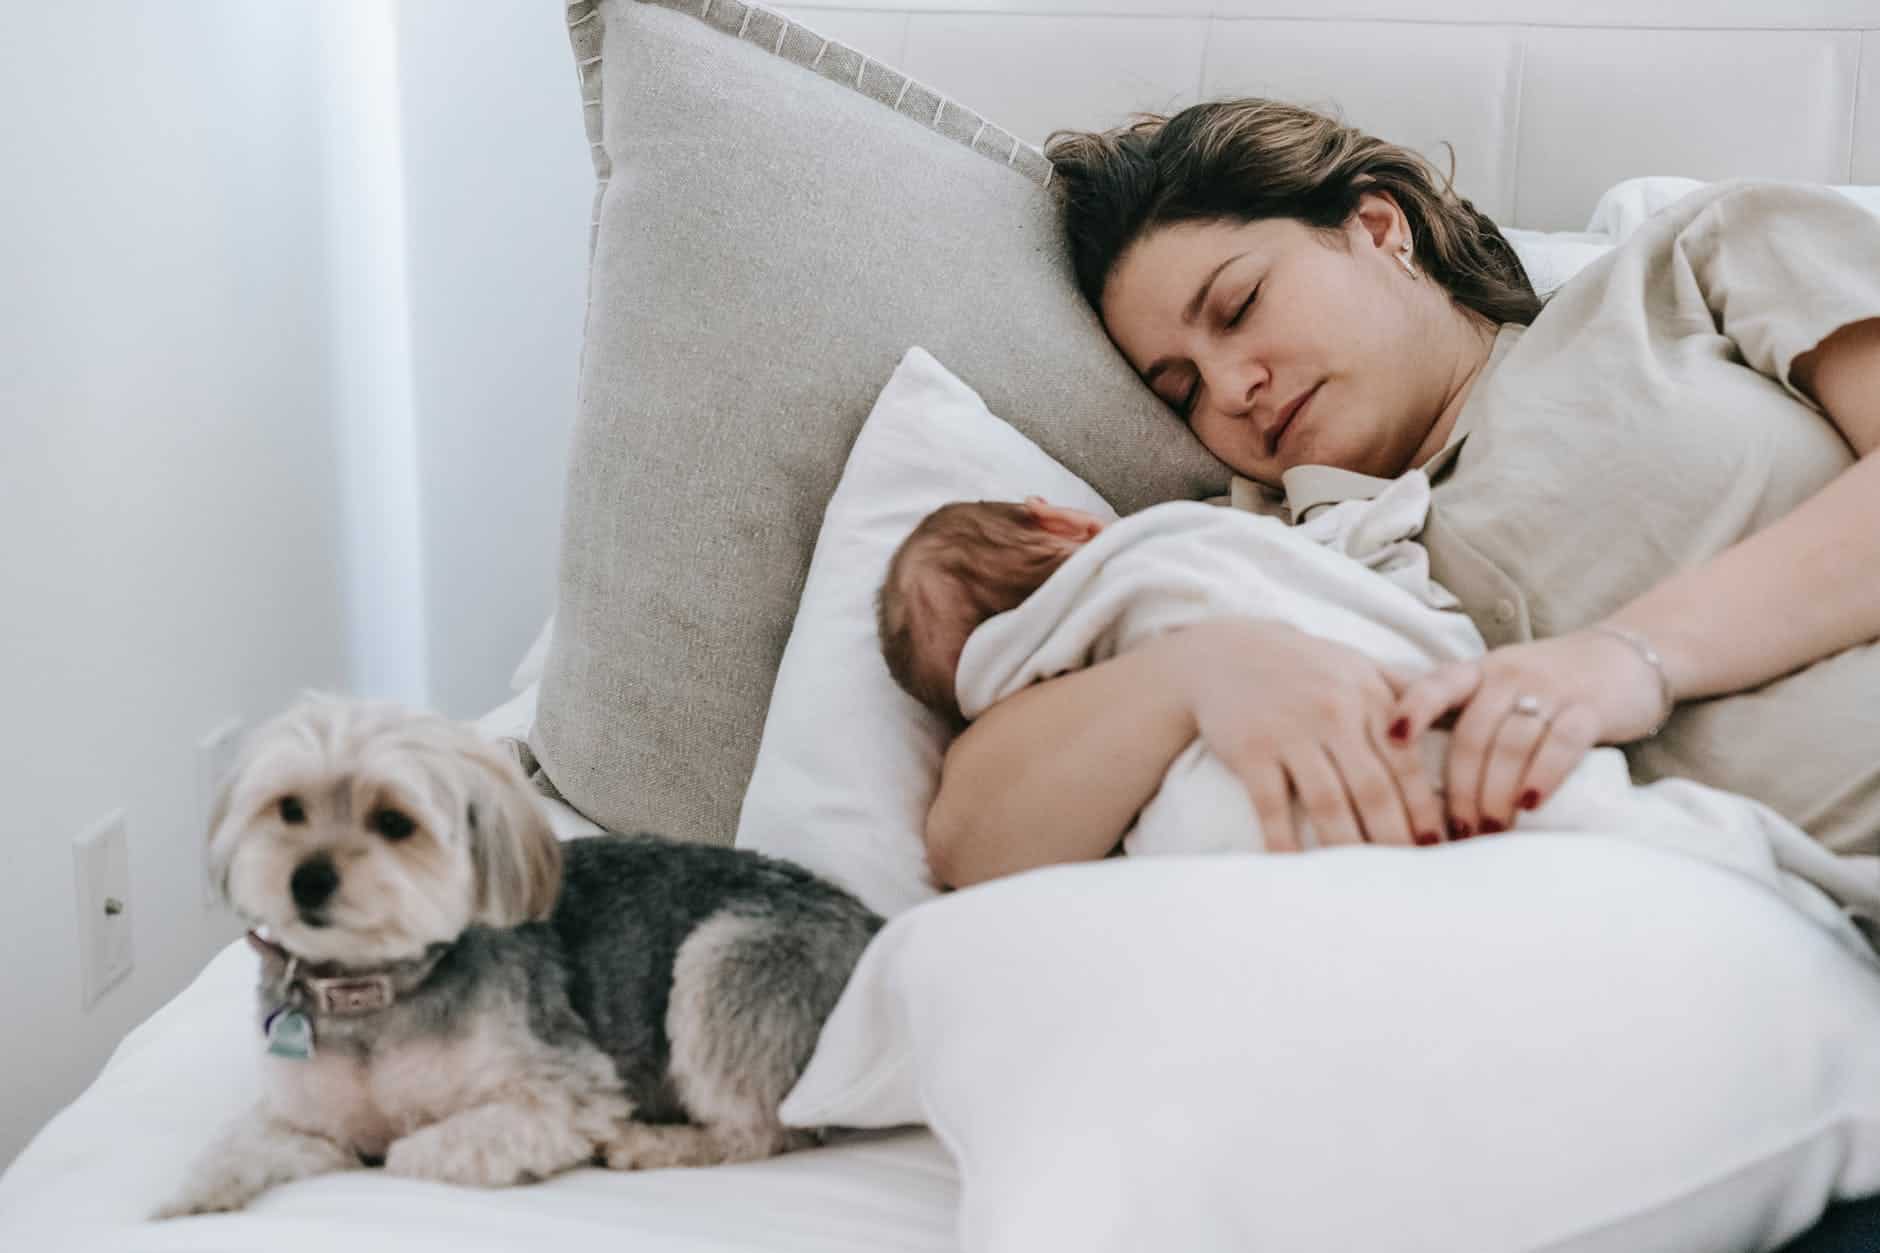 mother with infant baby sleeping near dog